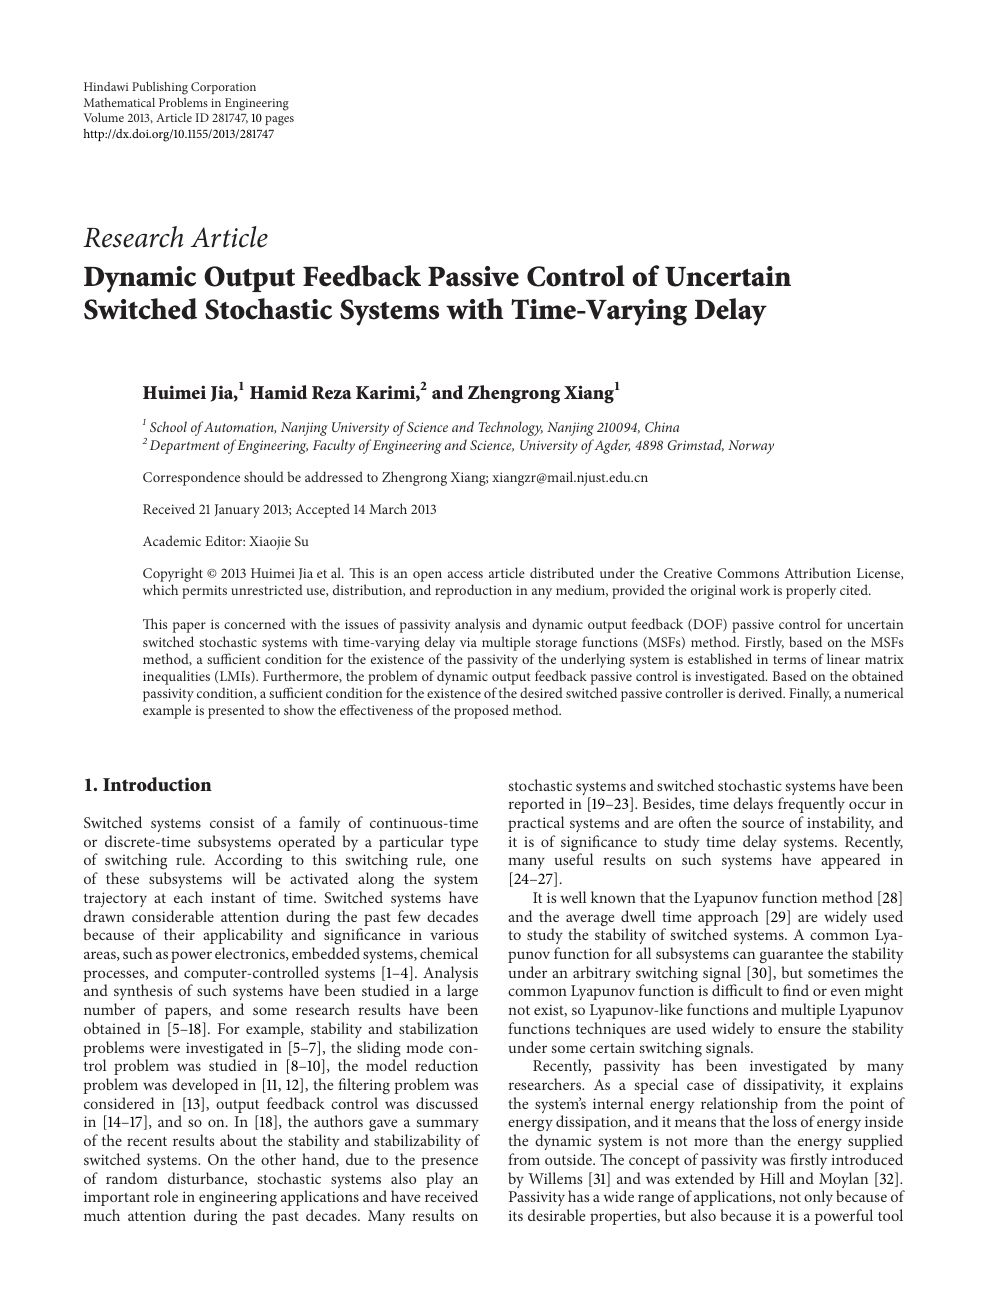 Dynamic Output Feedback Passive Control Of Uncertain Switched Stochastic Systems With Time Varying Delay Topic Of Research Paper In Mathematics Download Scholarly Article Pdf And Read For Free On Cyberleninka Open Science